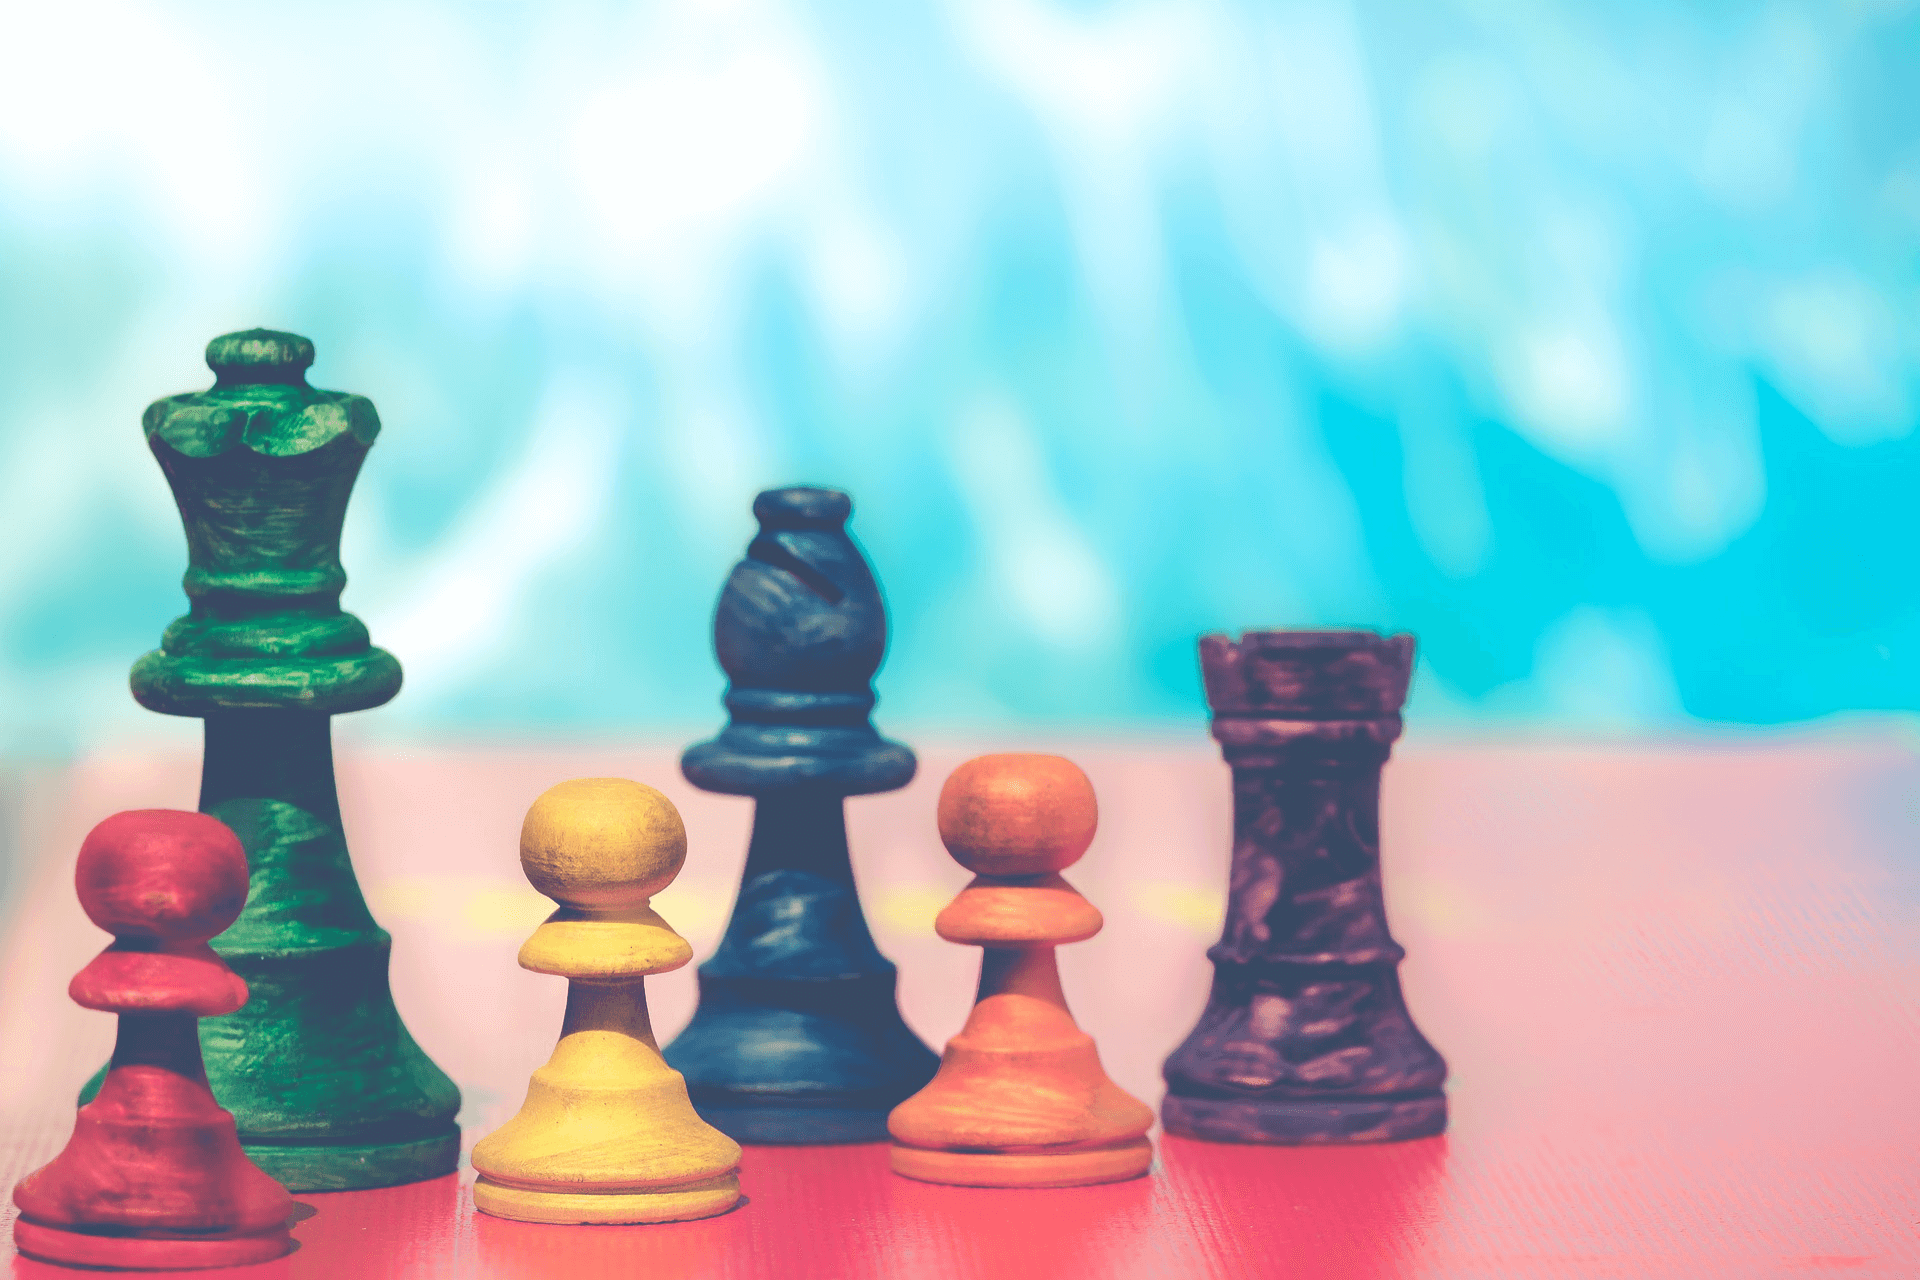 the image shows 5 pawns representing strategy